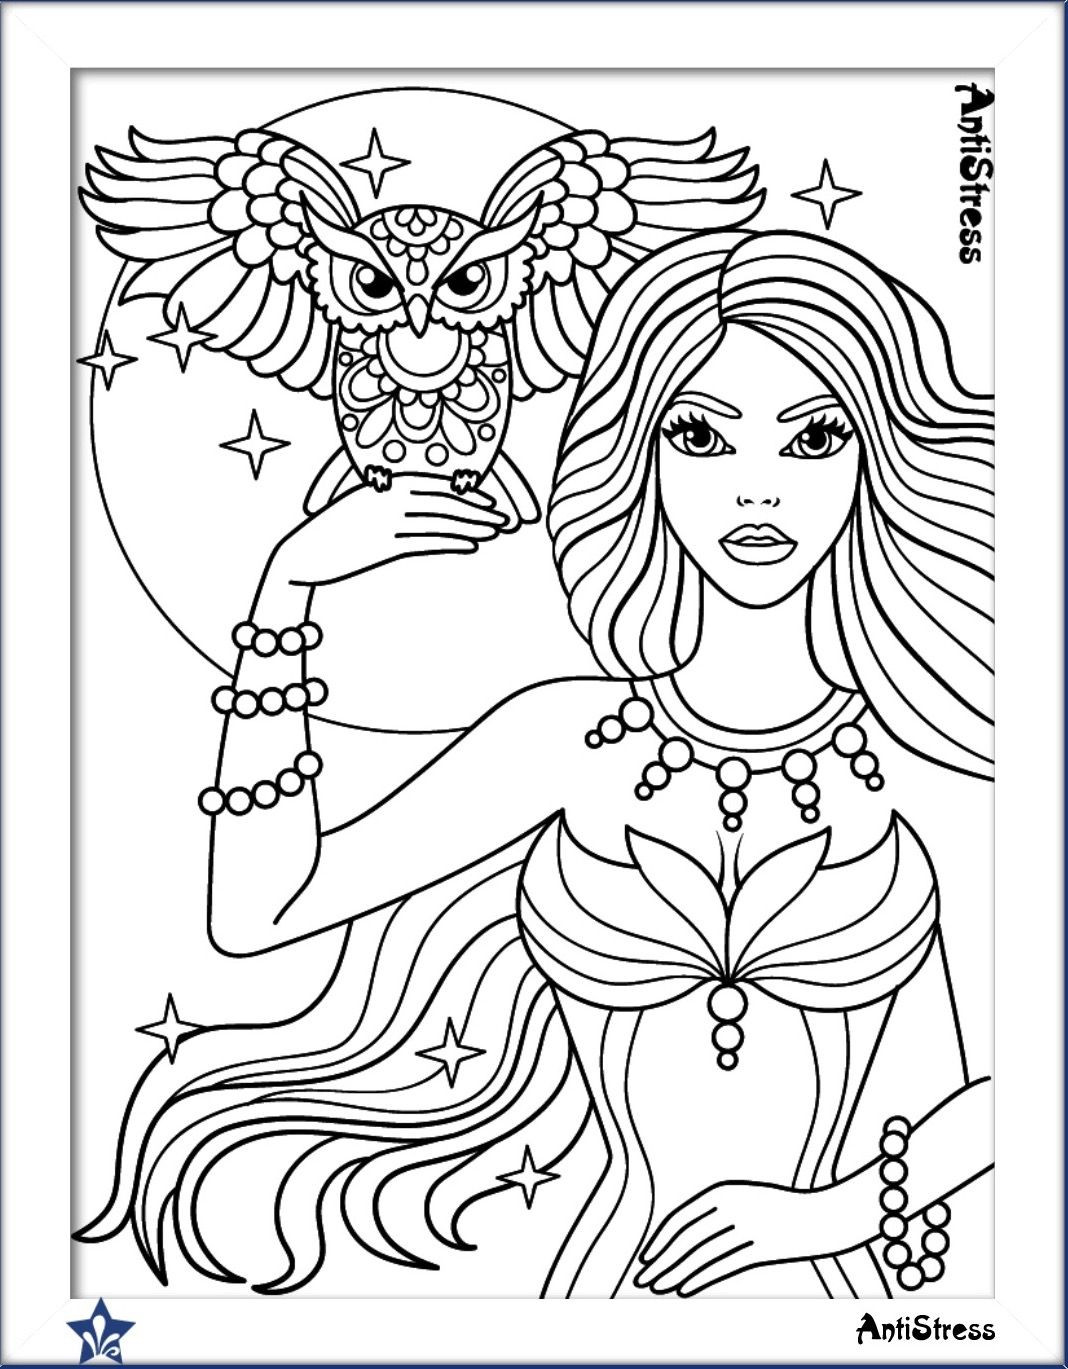 Coloring Pages Of Girls For Adults
 Owl and girl coloring page